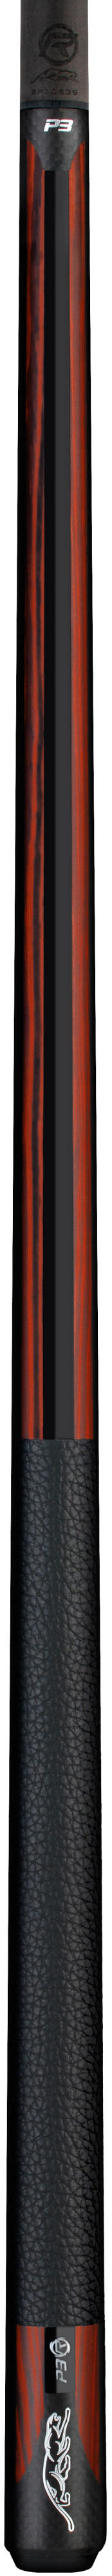 Predator P3 Red Tiger Leather Luxe Pool Cue